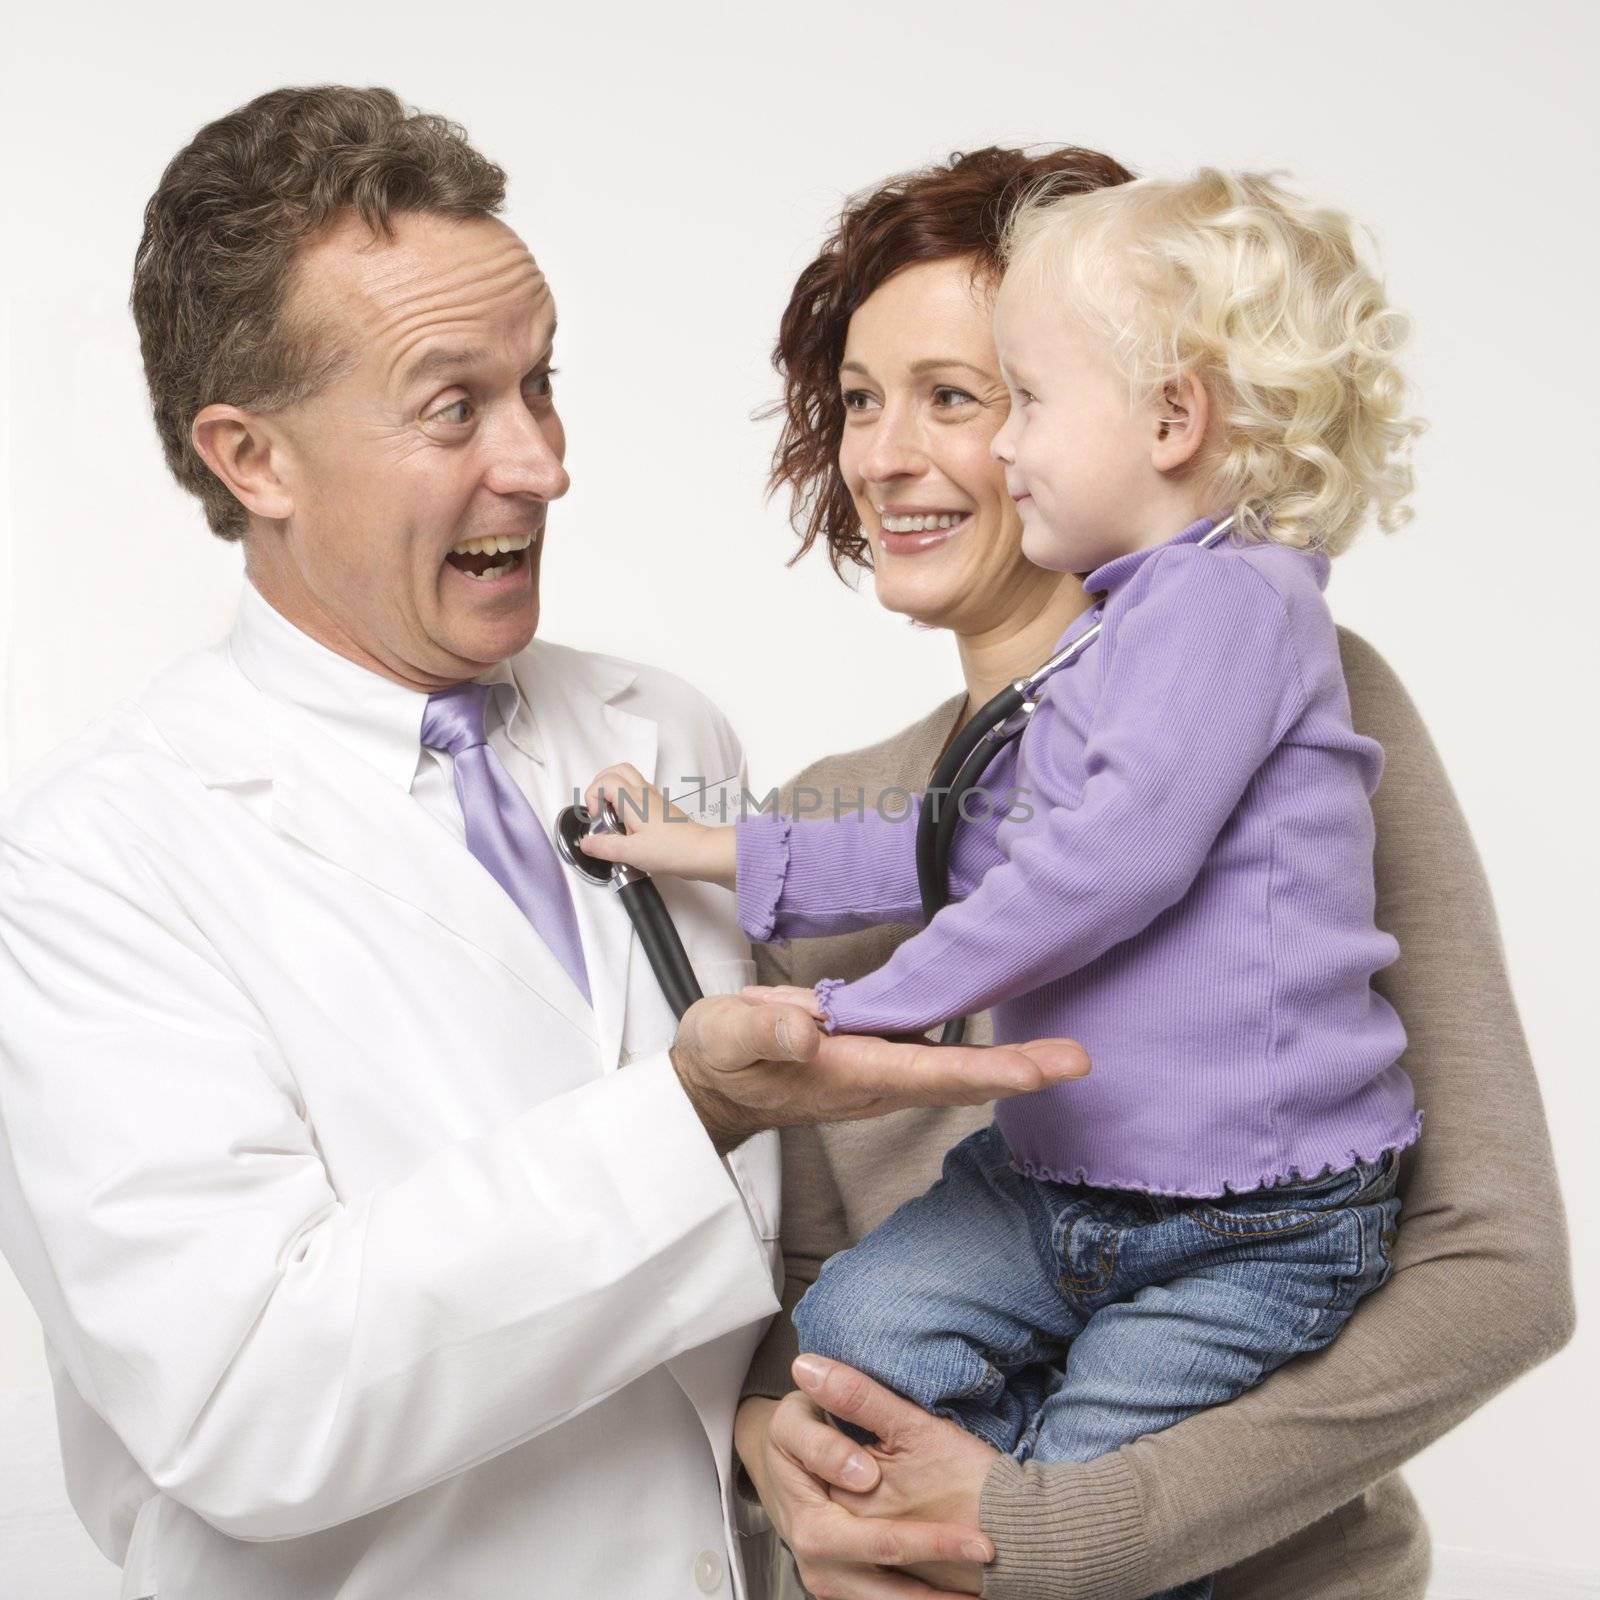 Caucasian female toddler holding stethoscope up to middle-aged male doctor smiling.